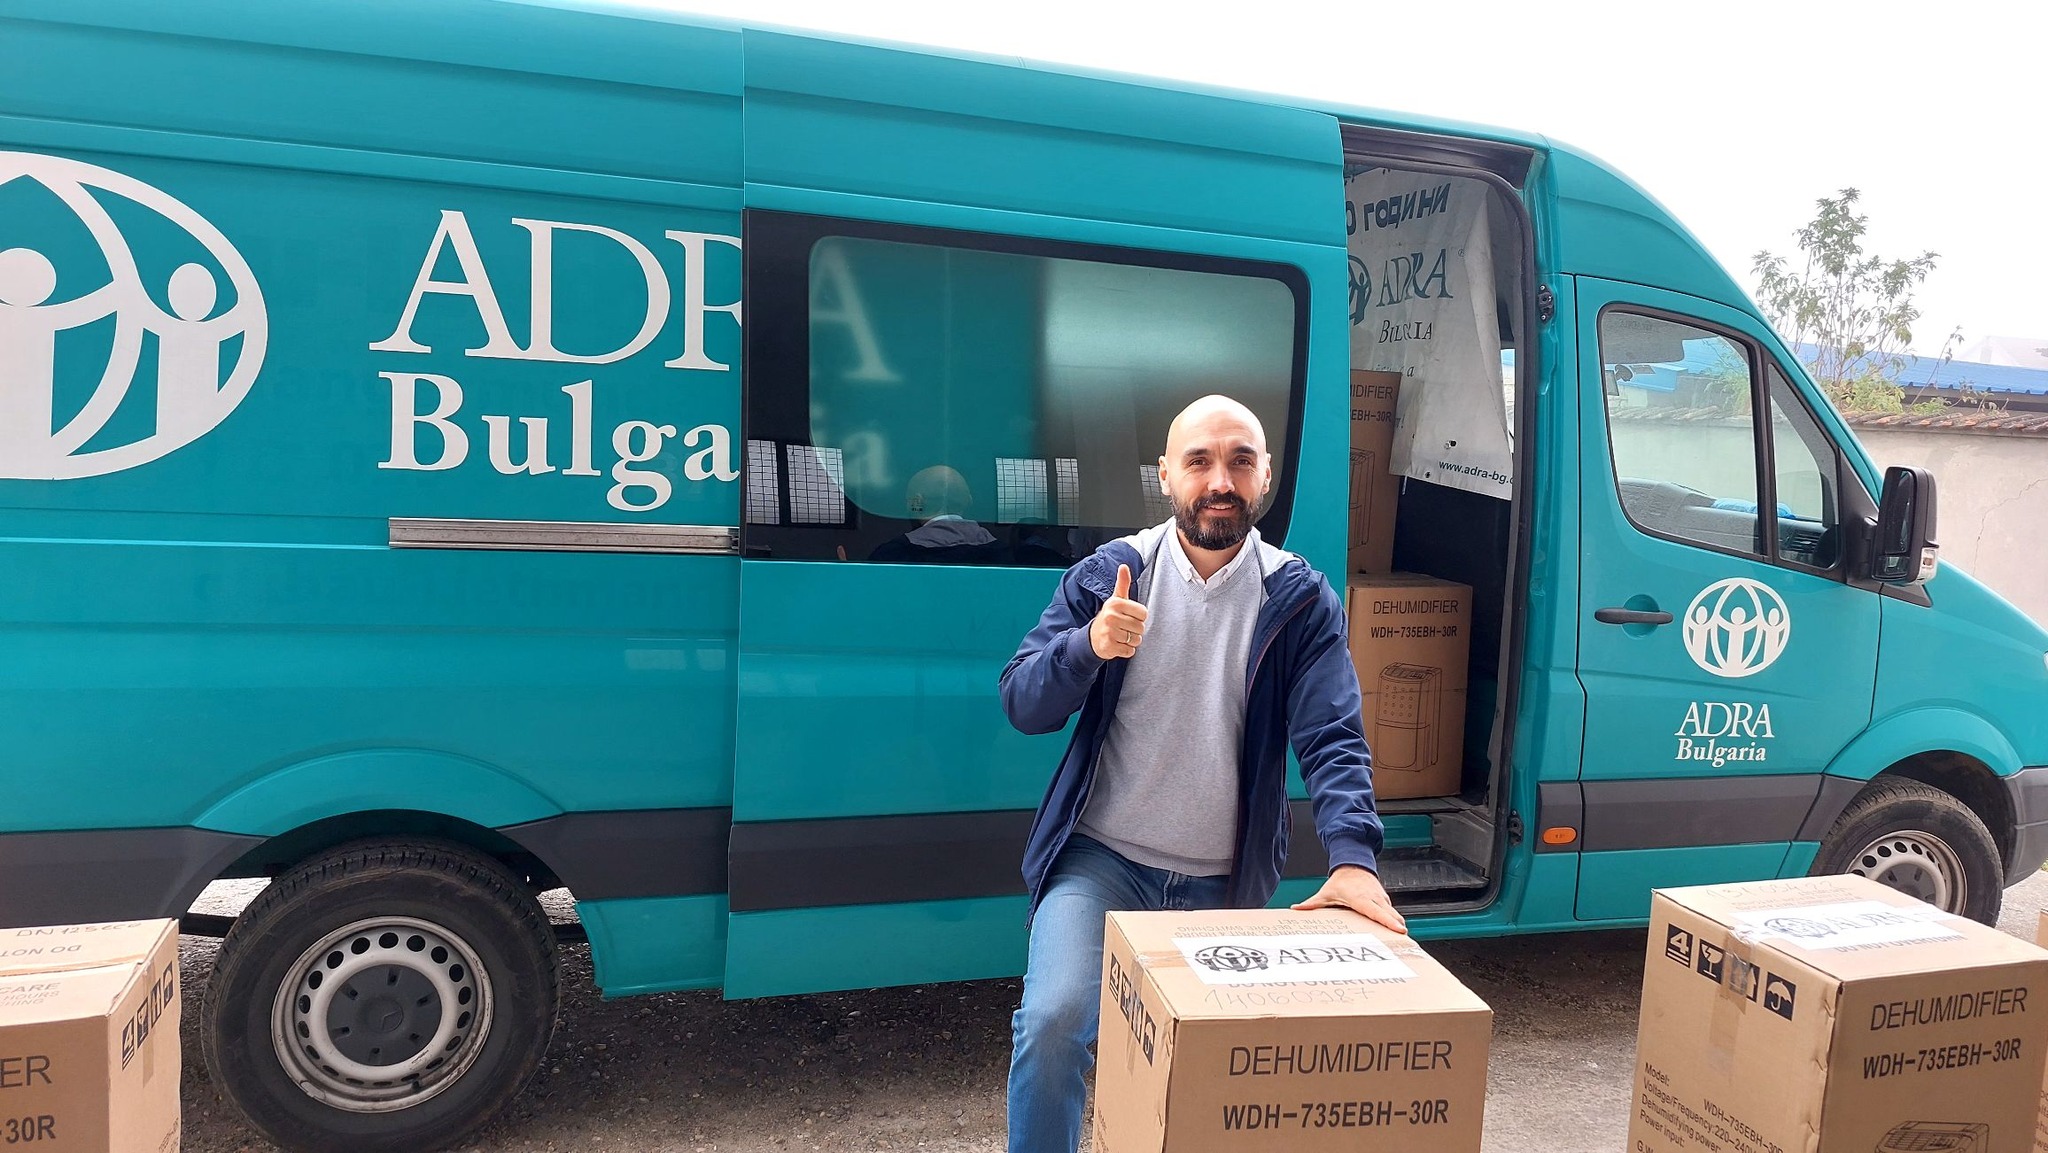 ADRA Bulgaria is helping with recovery after severe floods